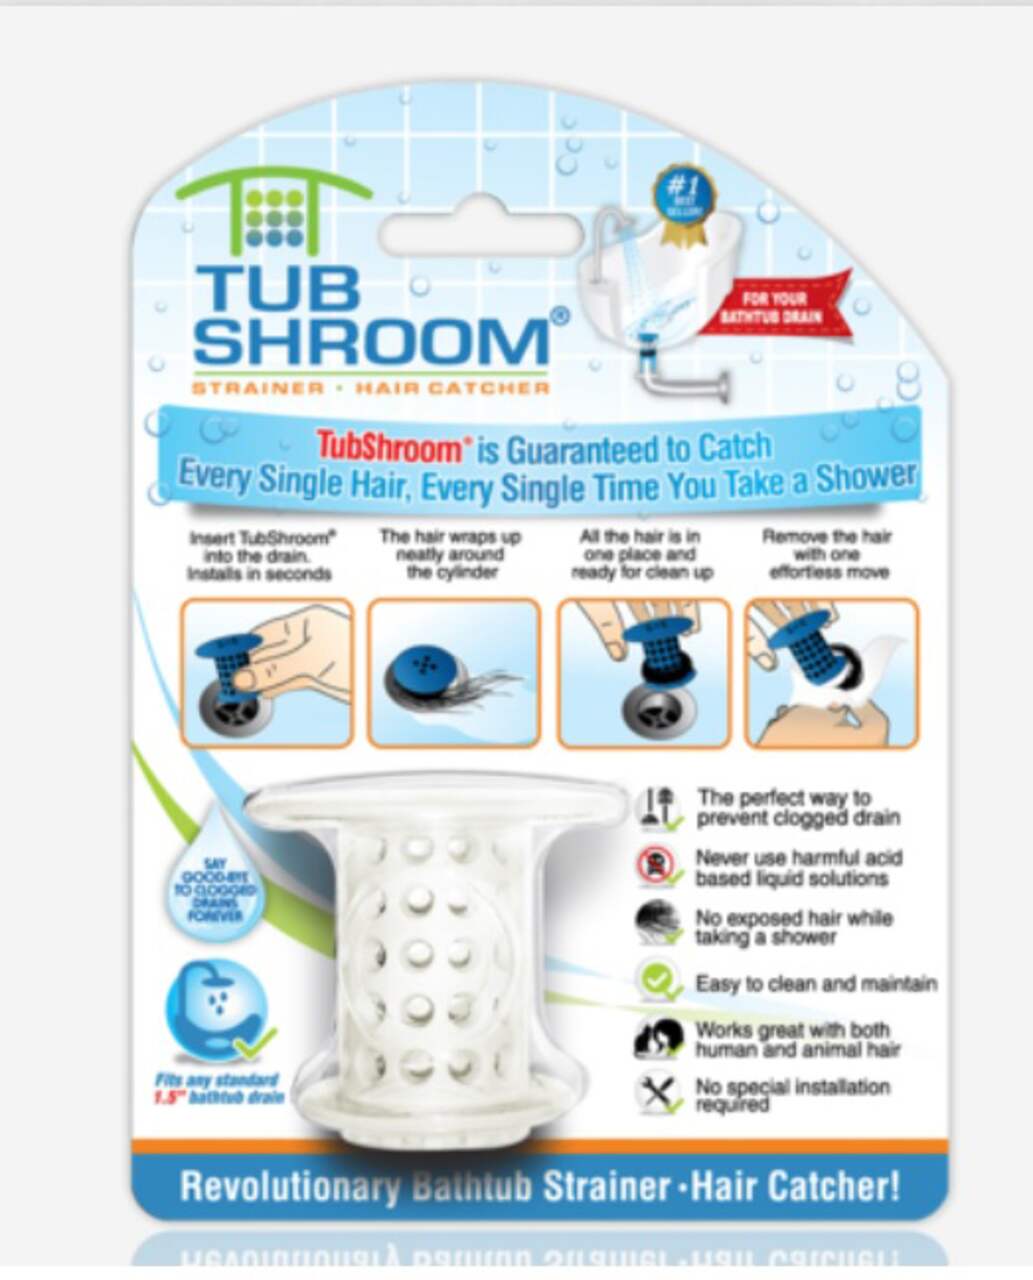 https://media-www.canadiantire.ca/product/fixing/plumbing/rough-plumbing/0633483/tubshroom-bathtub-hair-catcher-white-5e929e0d-7660-4bd8-a09b-25b5ac400a1f.png?imdensity=1&imwidth=1244&impolicy=mZoom